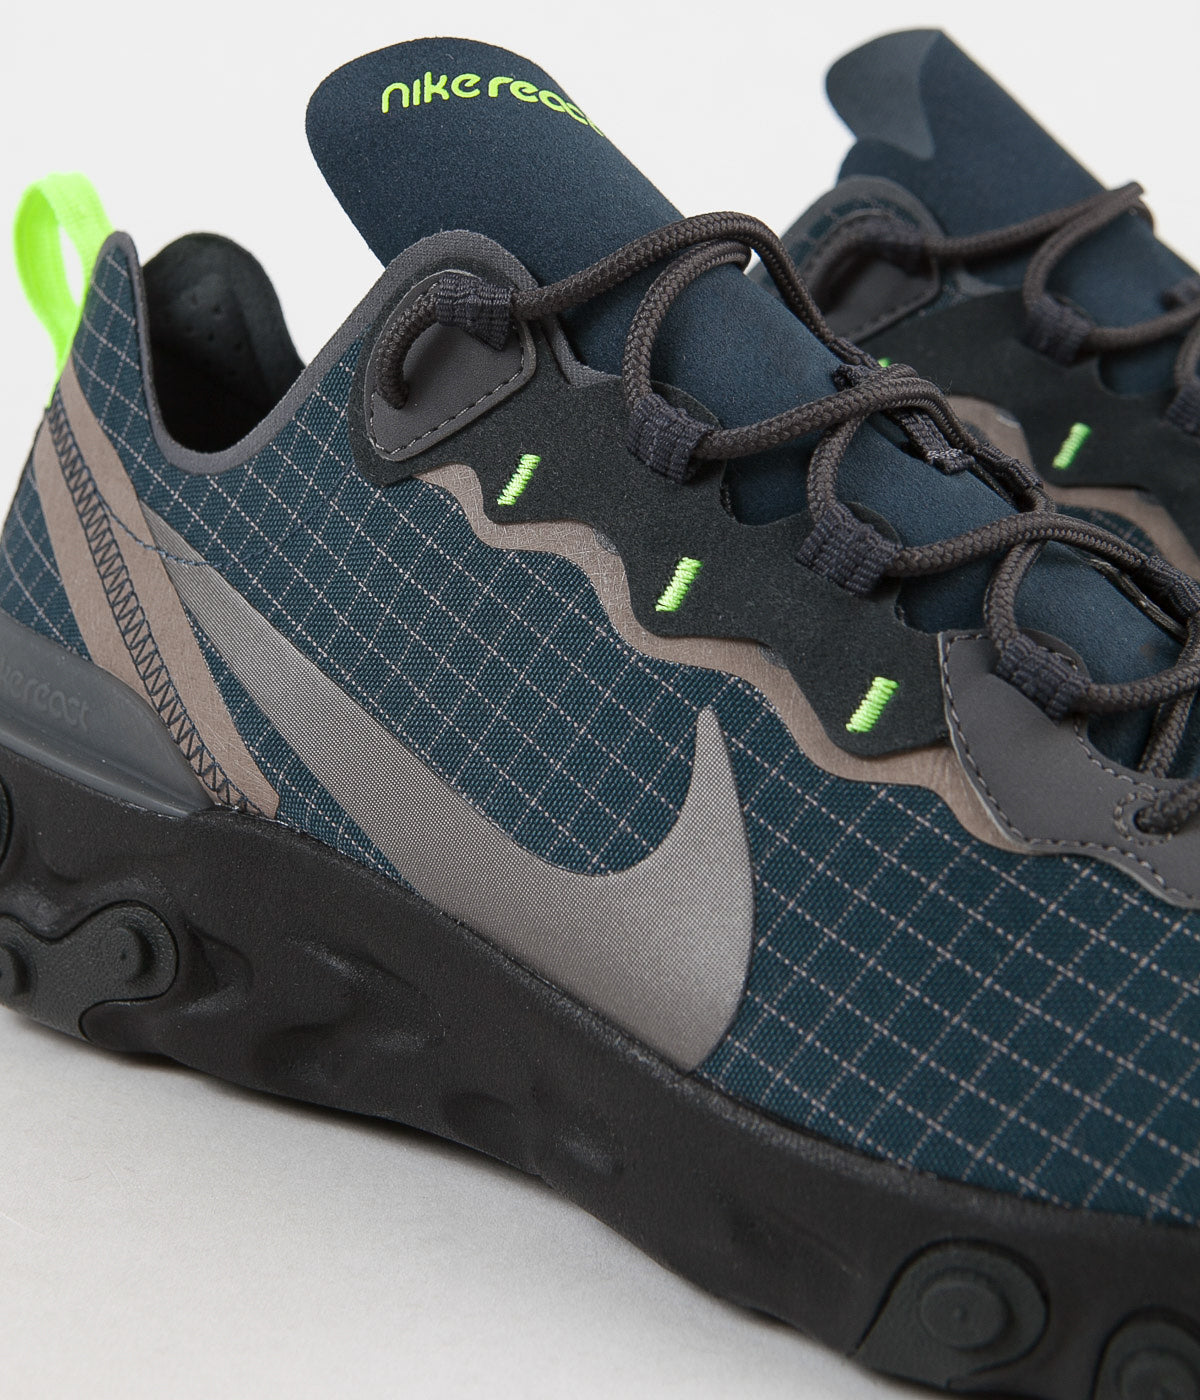 Nike React Element 55 Shoes - Armory Navy / Metallic Grey - Volt | Always in Colour